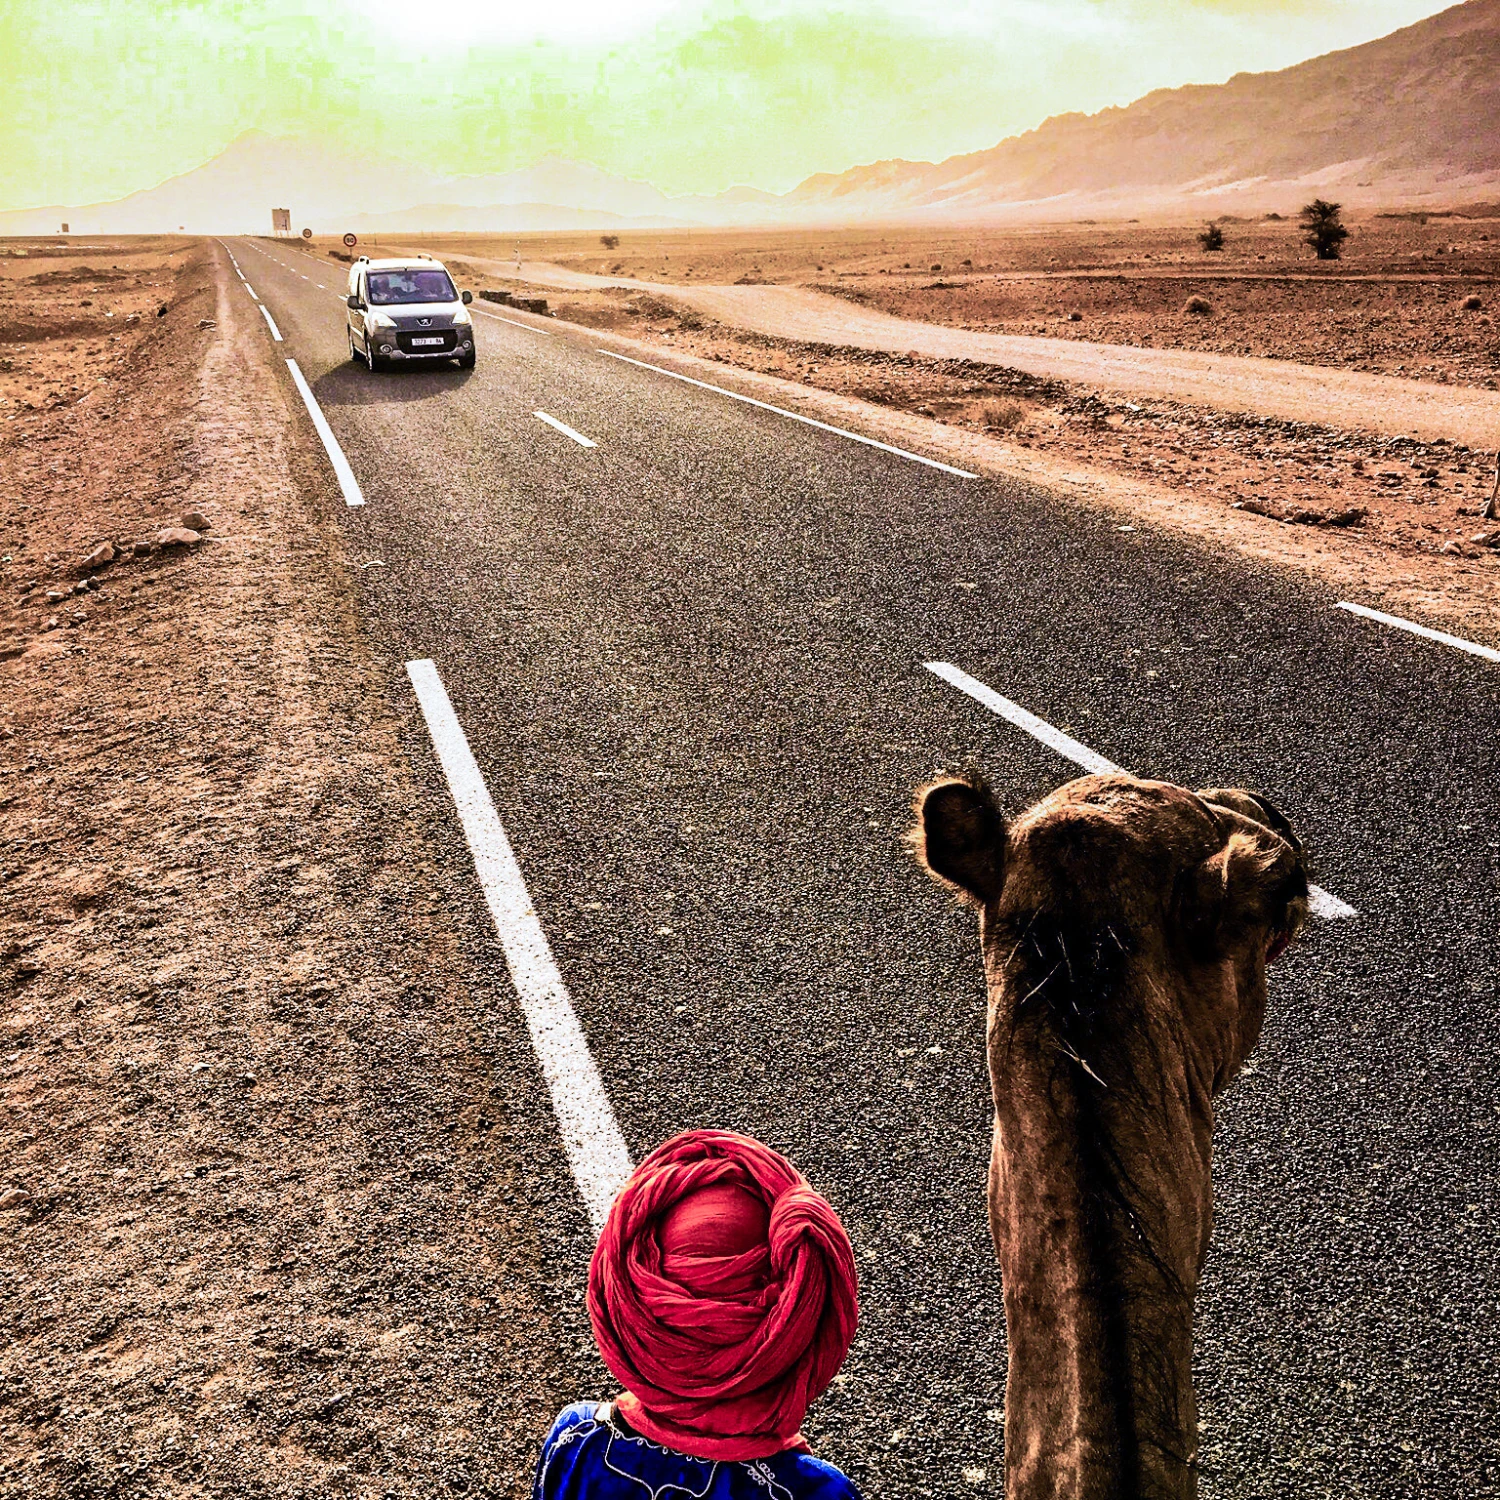 Camel and car view on a road in the desert